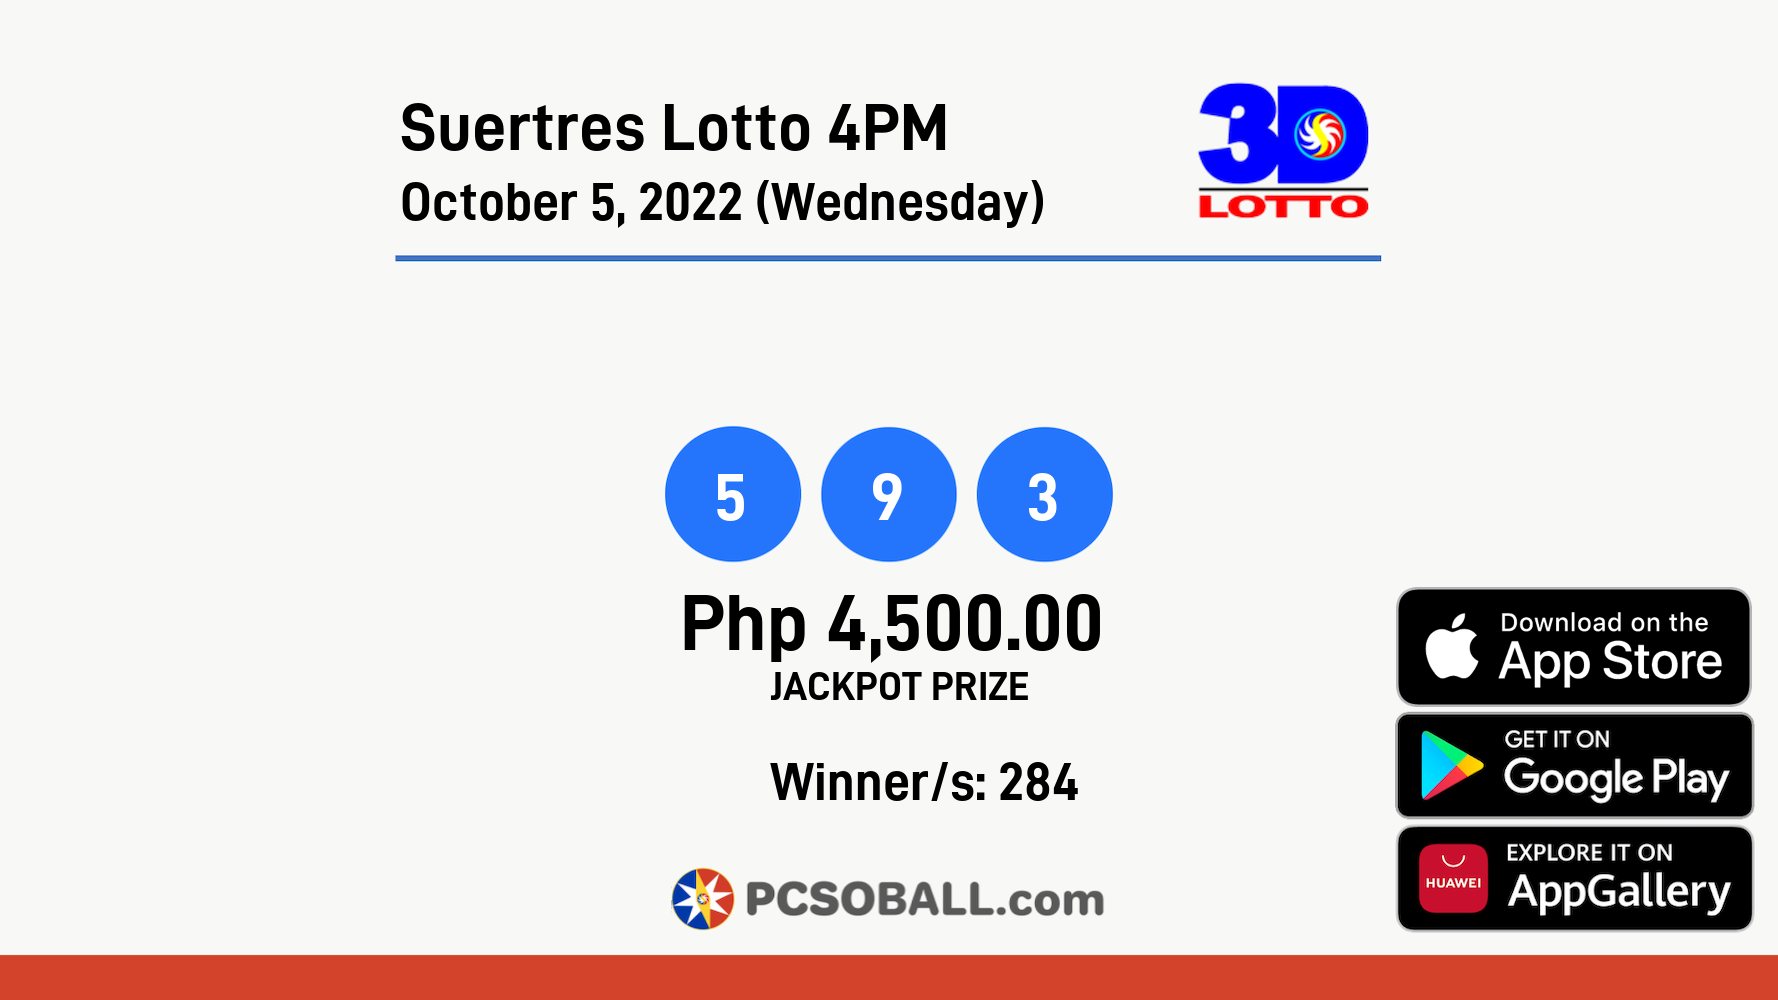 Suertres Lotto 4PM October 5, 2022 (Wednesday) Result